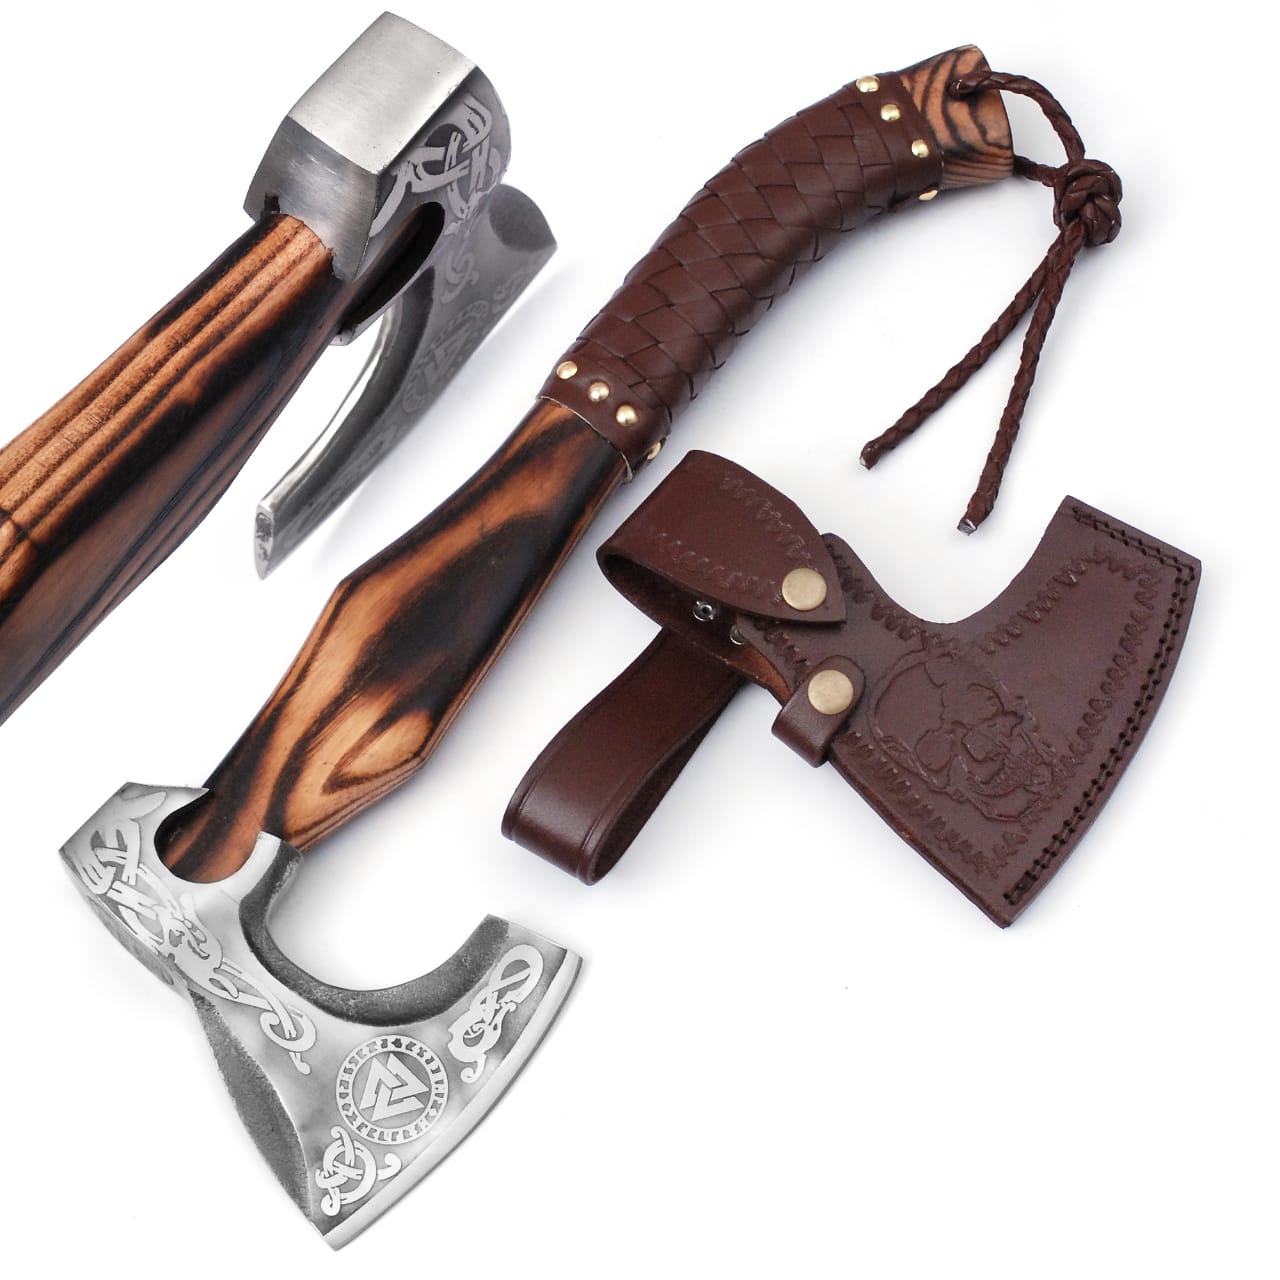 Norse King Functional Medieval Viking Bearded Axe